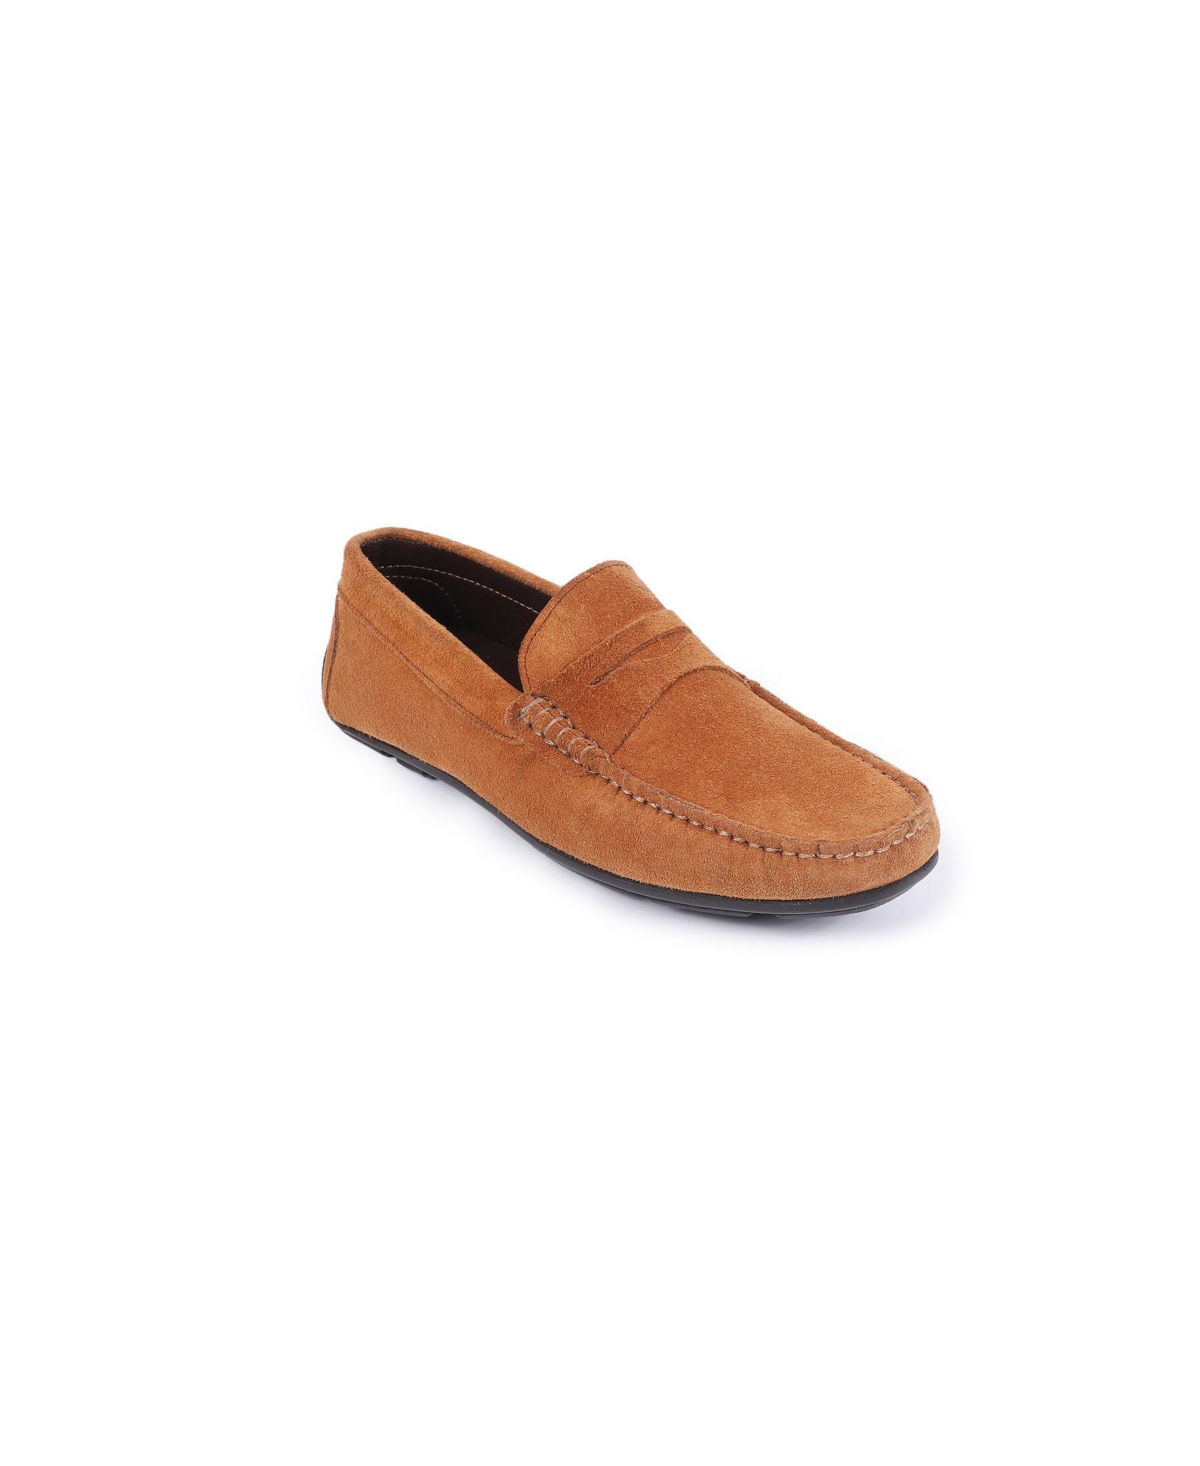 VELLAPAIS BEGONIA TAN COLOR SUEDE ALL DAY COMFORT MEN'S DRIVERS